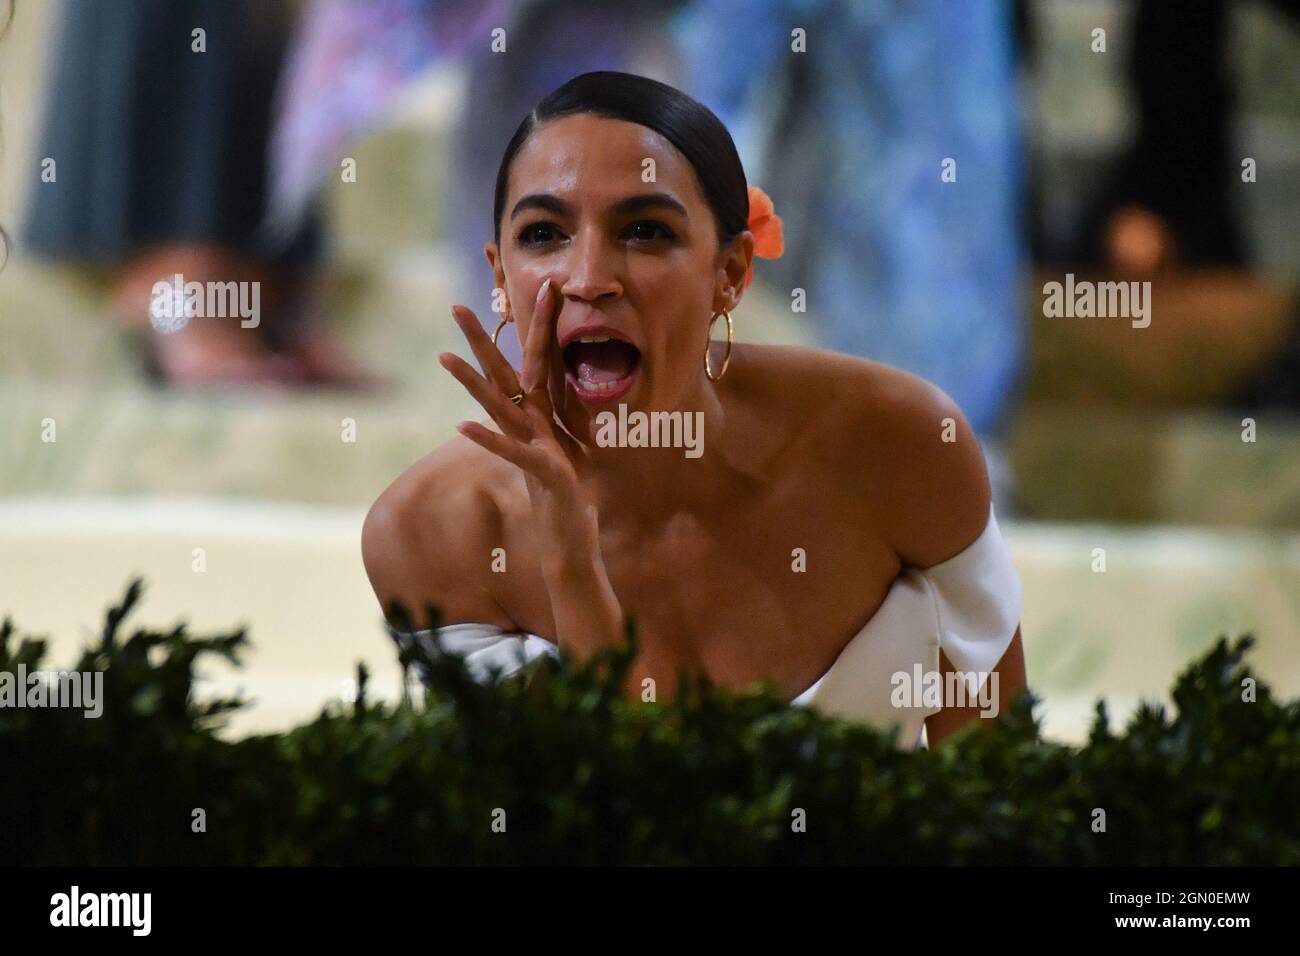 Alexandria Ocasio-Cortez attends The 2021 Met Gala Celebrating In America: A Lexicon Of Fashion at The Metropolitan Museum of Art on September 13, 202 Stock Photo